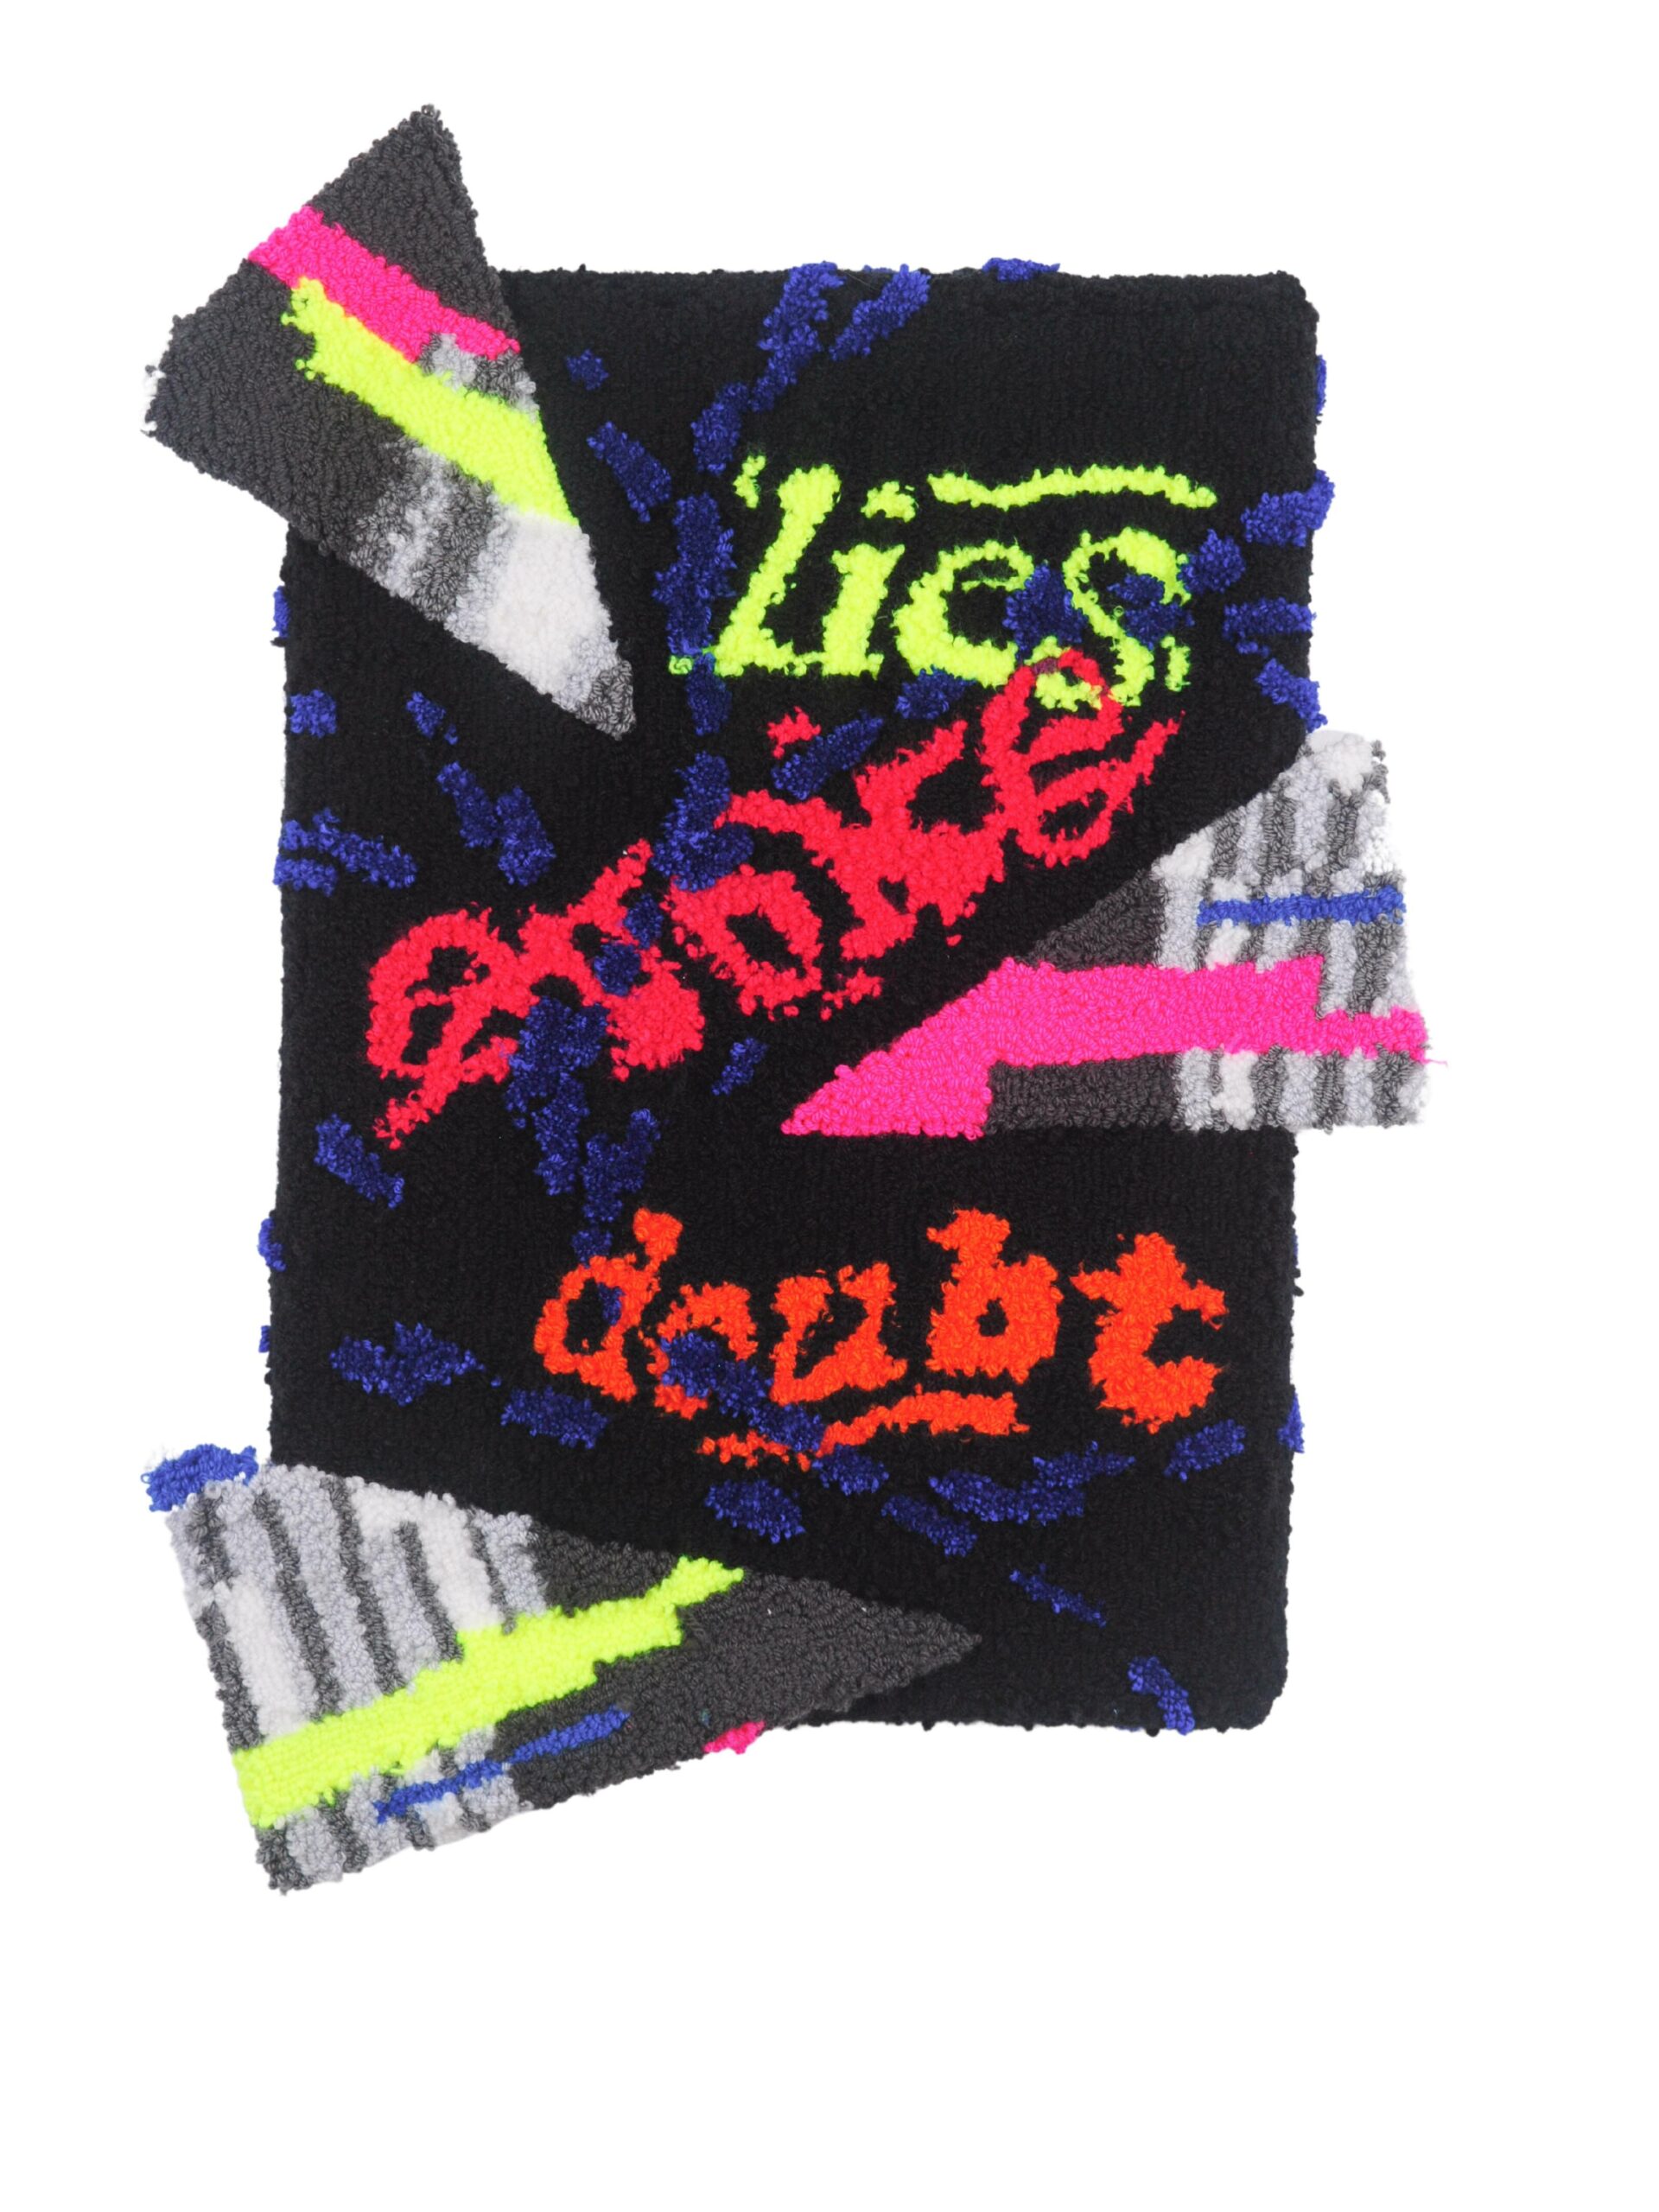 Multicolored fabric pieces glued together with text saying lies evoke doubt